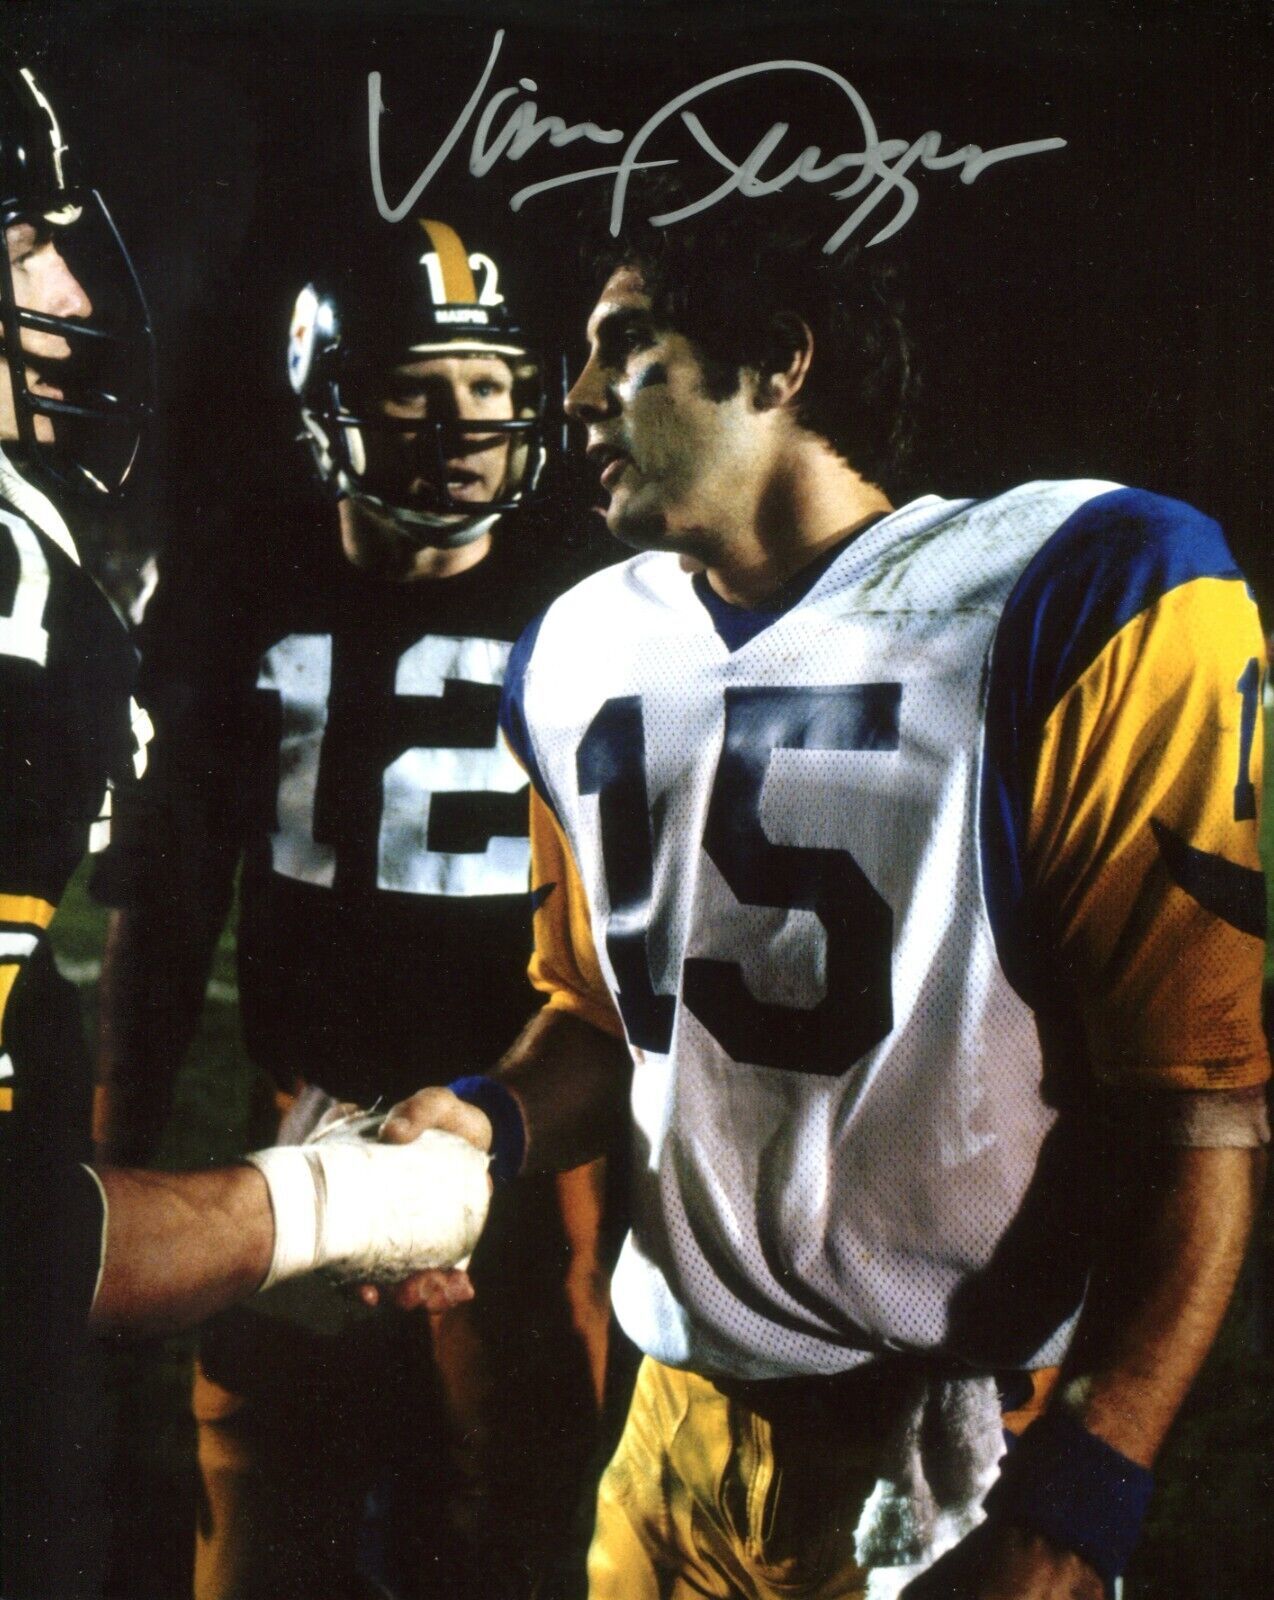 Primary image for VINCE FERRAGAMO SIGNED 8X10 PHOTO RAMS VS STEELERS SUPERBOWL XIV TERRY BRADSHAW